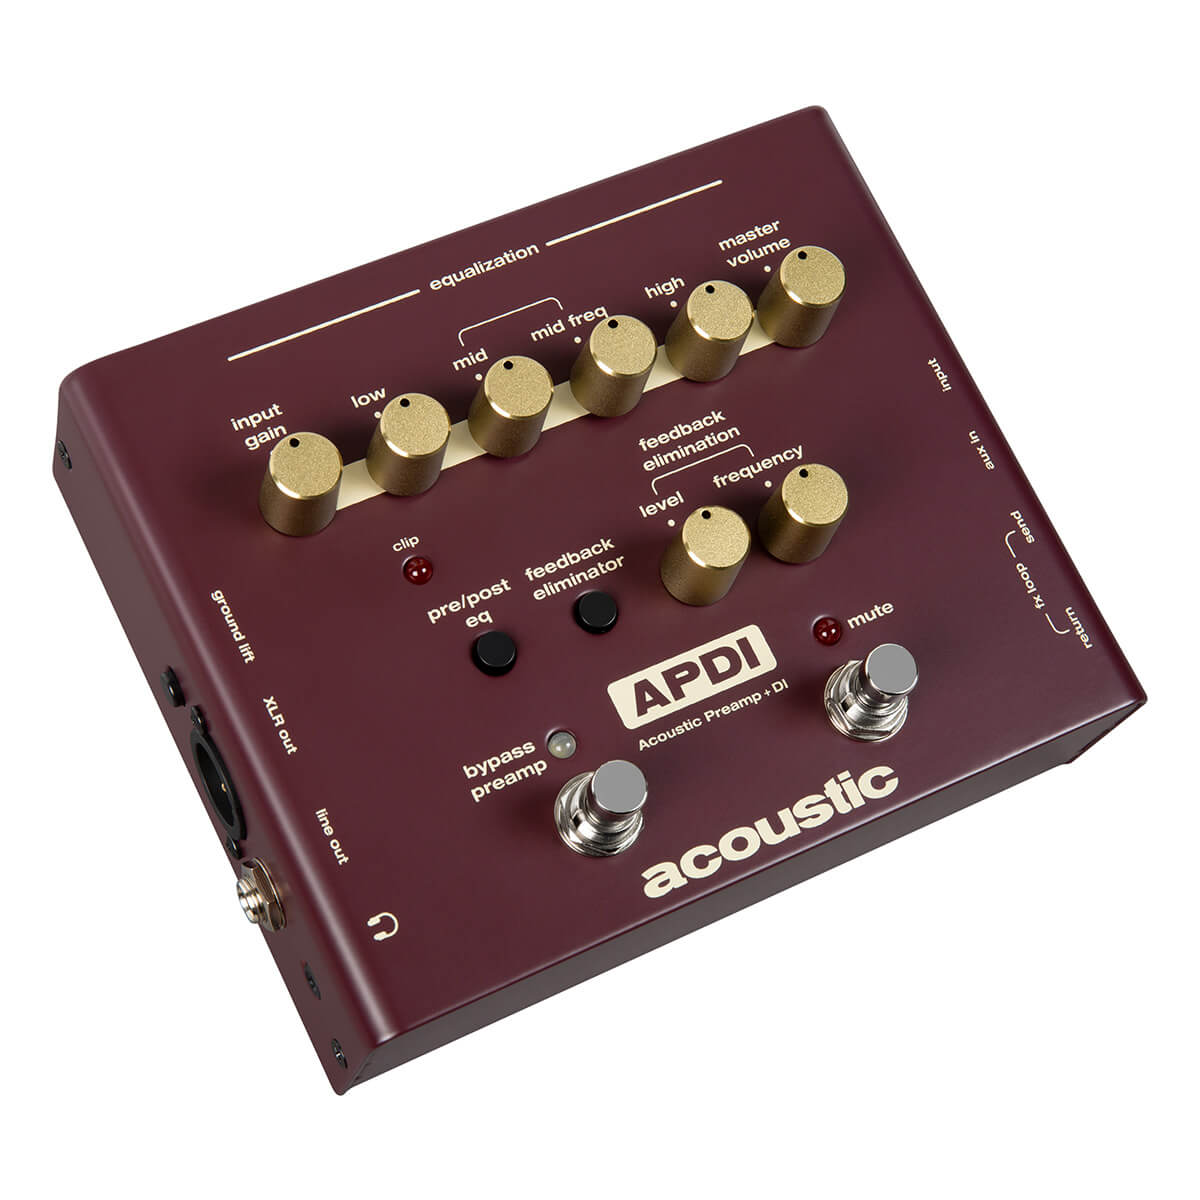 Top right angle view of acoustic APDI Acoustic Preamp + DI Pedal